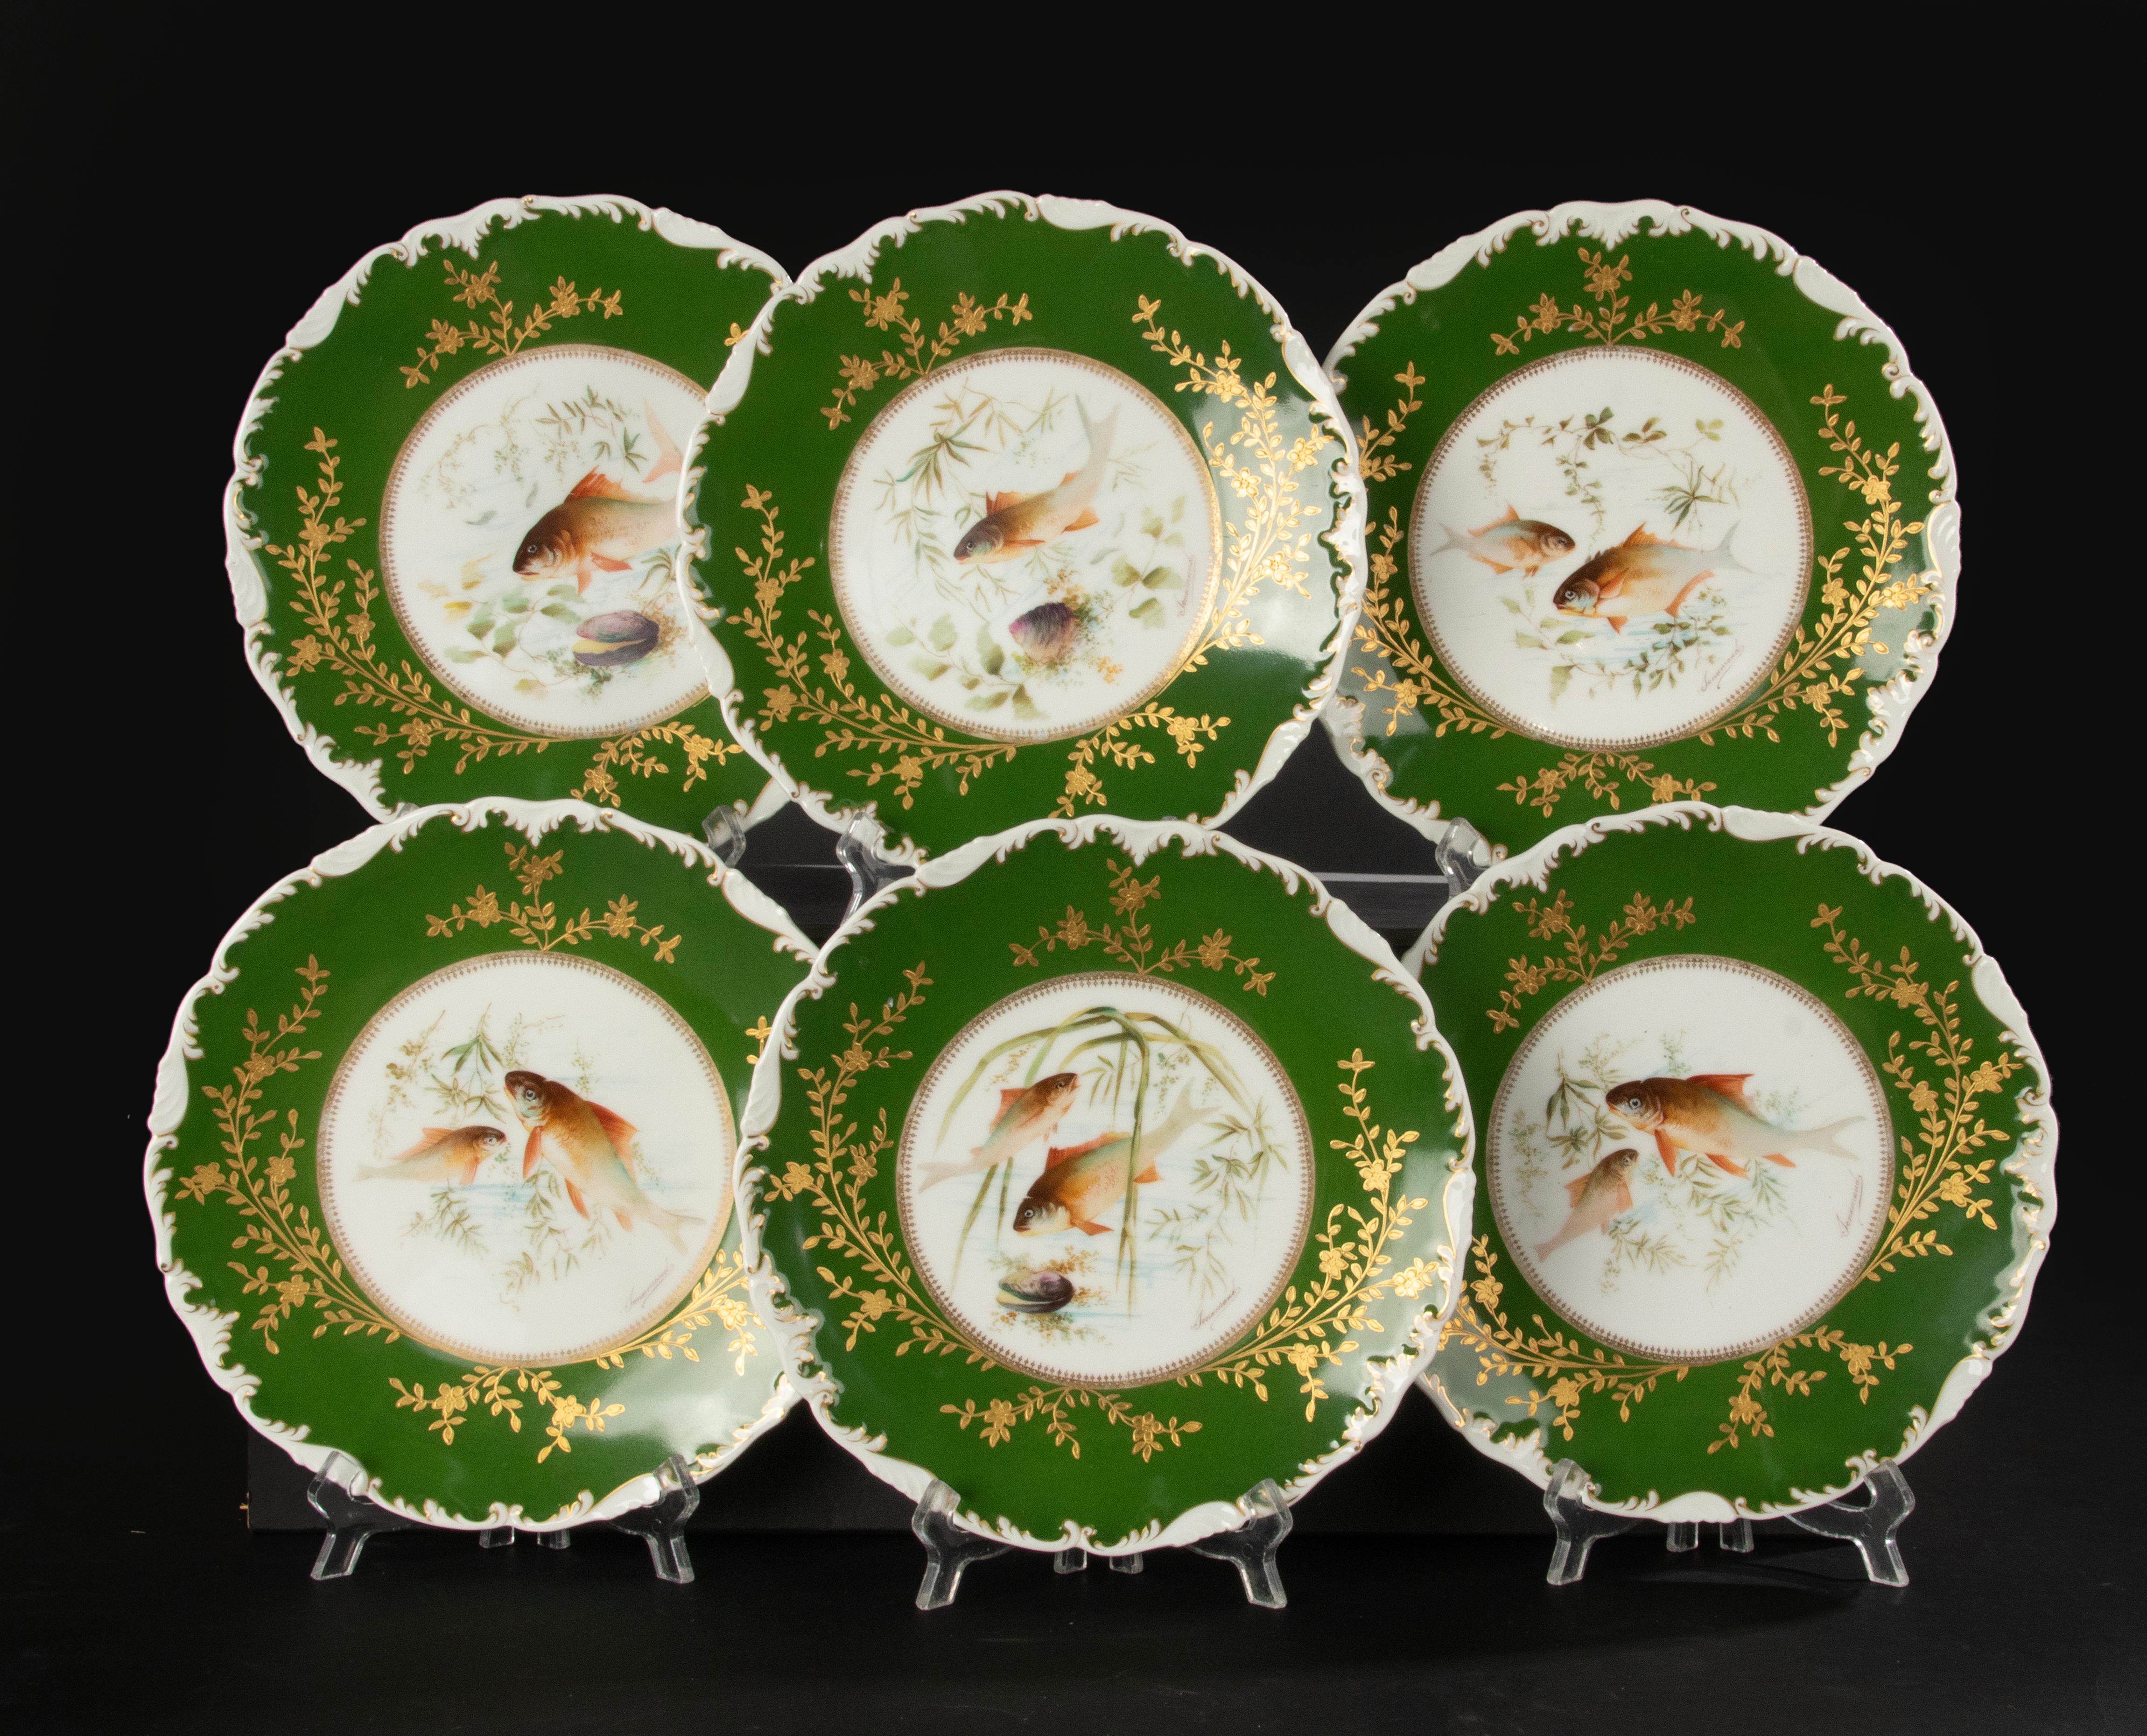 A great set of 6 porcelain fish plates, made by the French brand Limoges. The plates date from circa 1900-1910. They are decorated and signed by Tressemanes & Vogt. 
The plates are in great condition. No chips and no hairlines. The decorations and